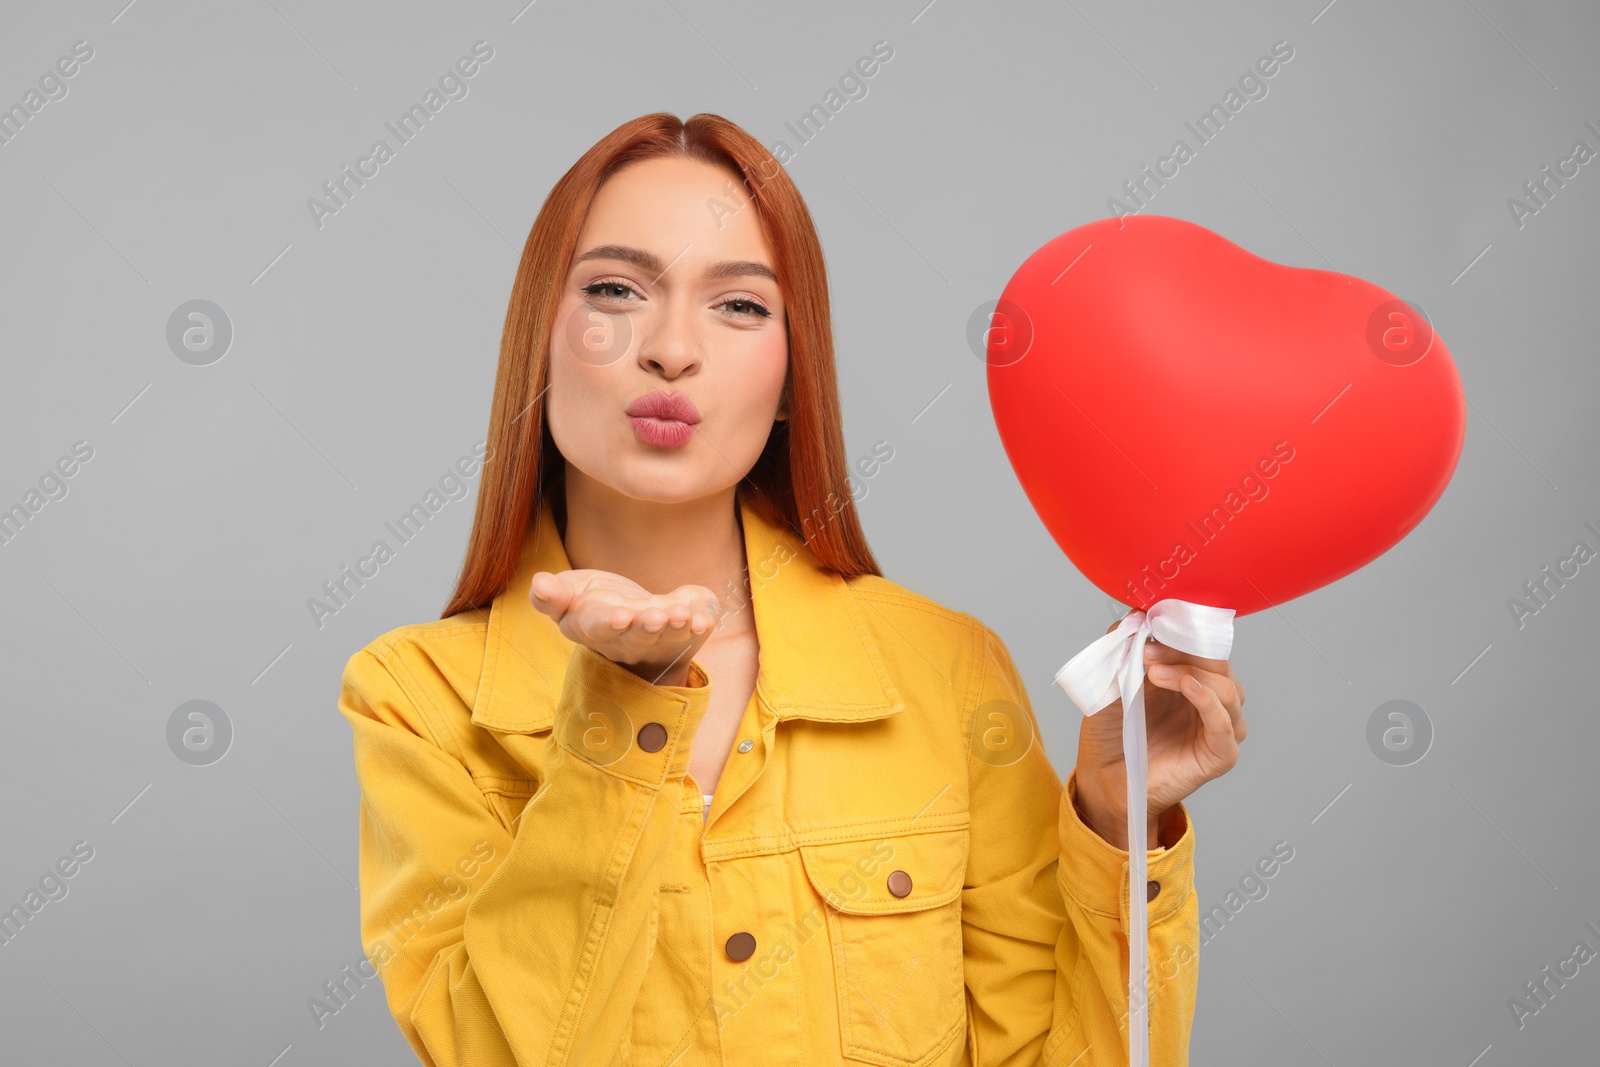 Photo of Beautiful woman with red heart shaped balloon blowing kiss on grey background